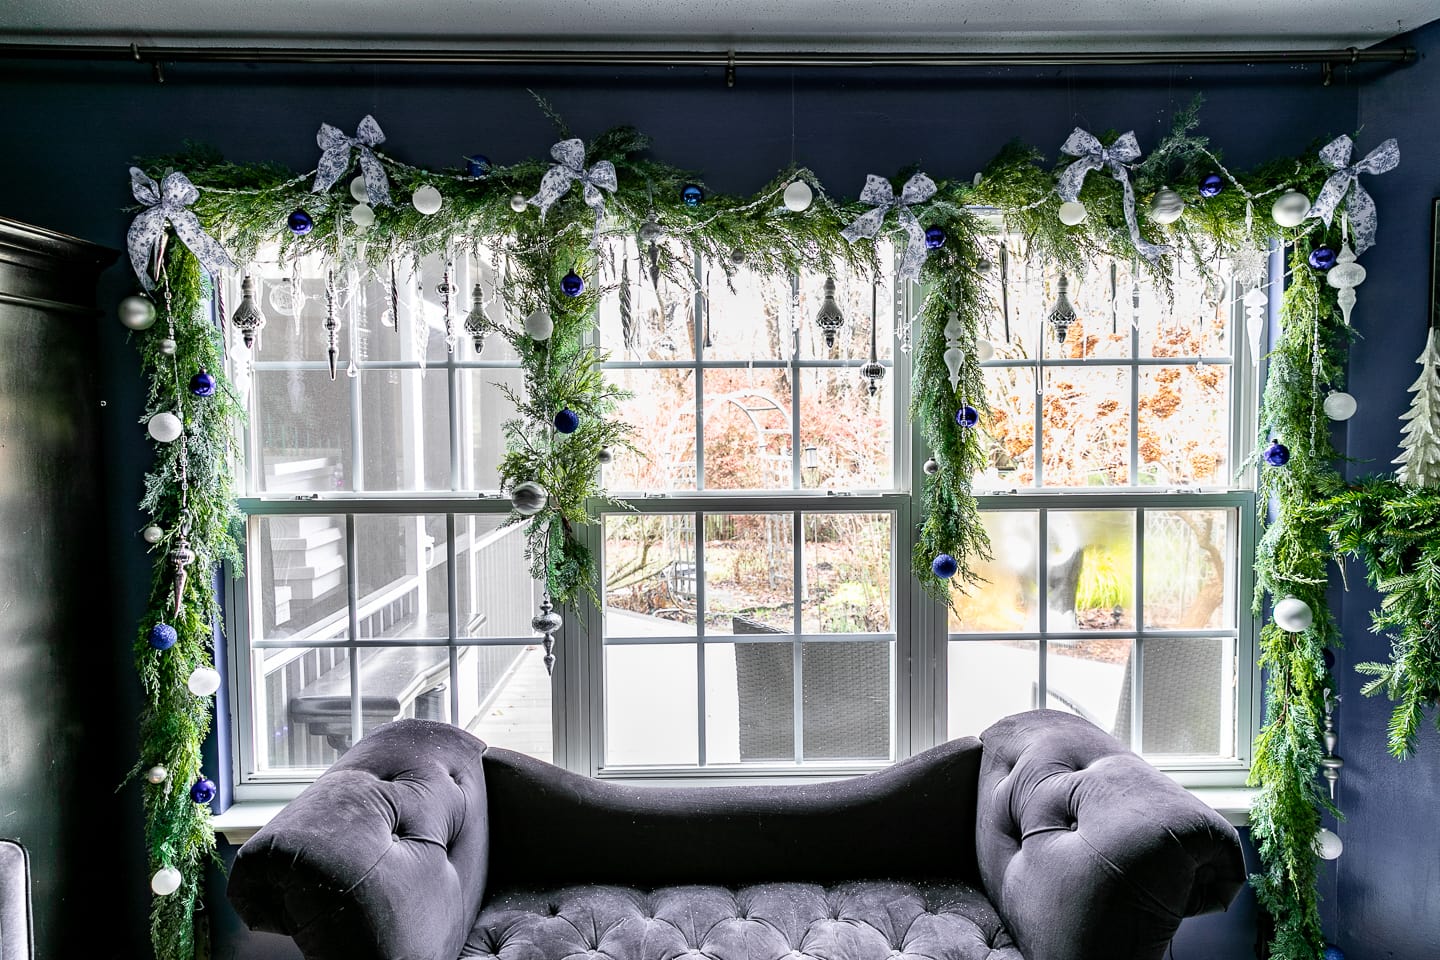 DIY Christmas window garland decorated with blue and white ornaments, glass finials and blue and white bows